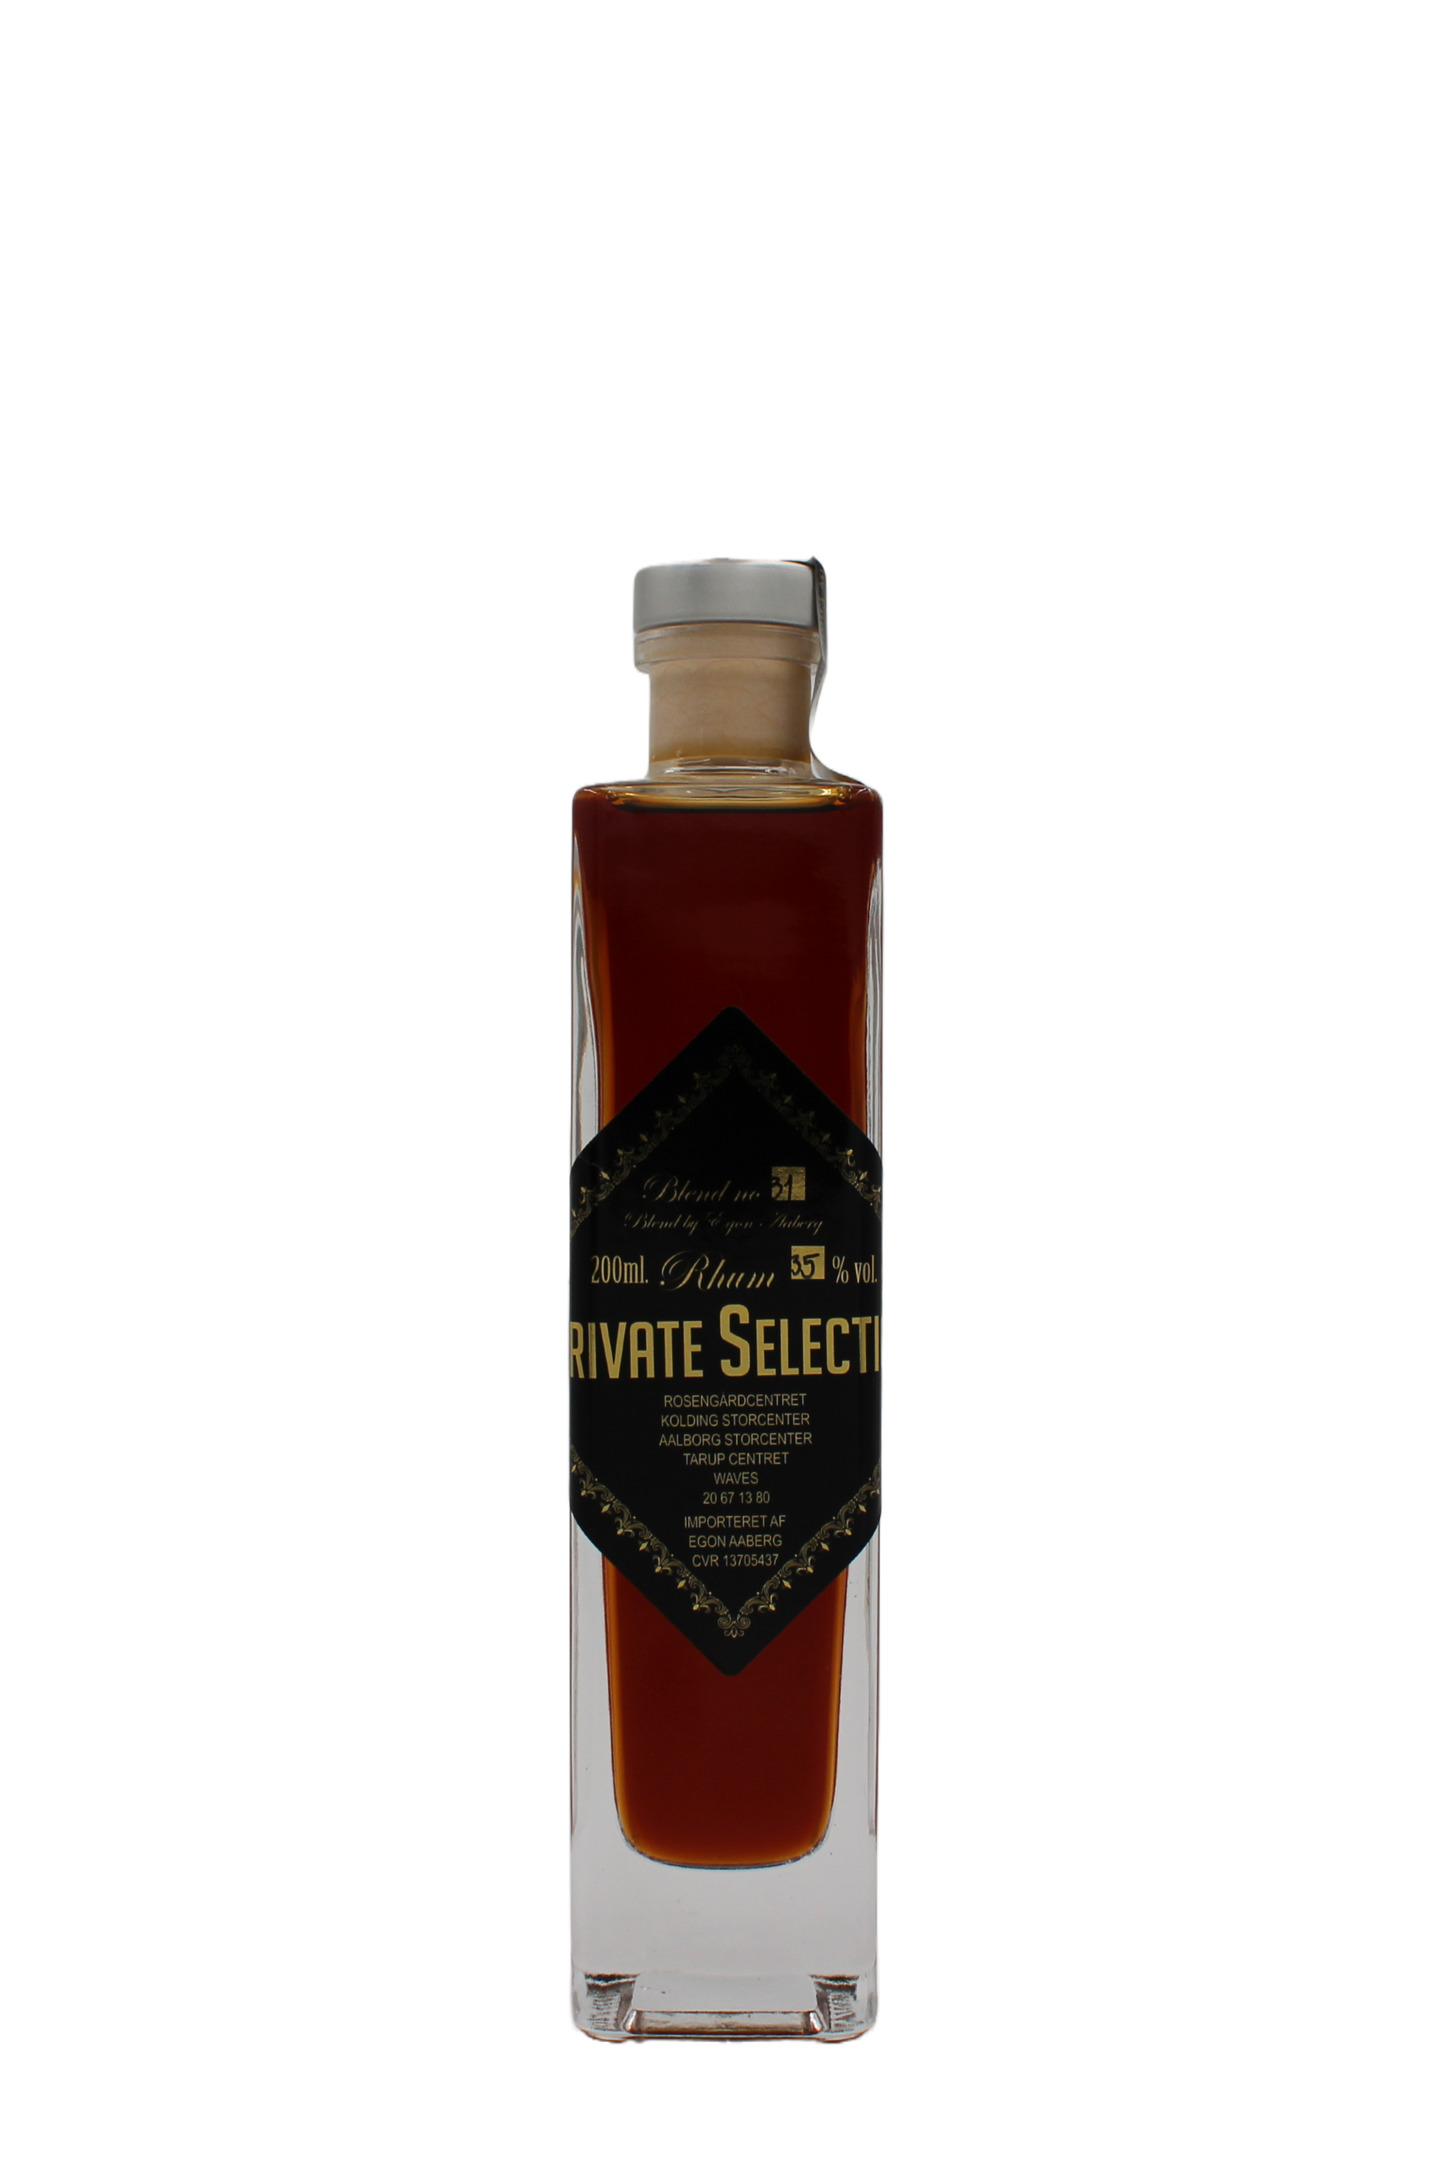 Private Selection - Blend no. 31 200ml